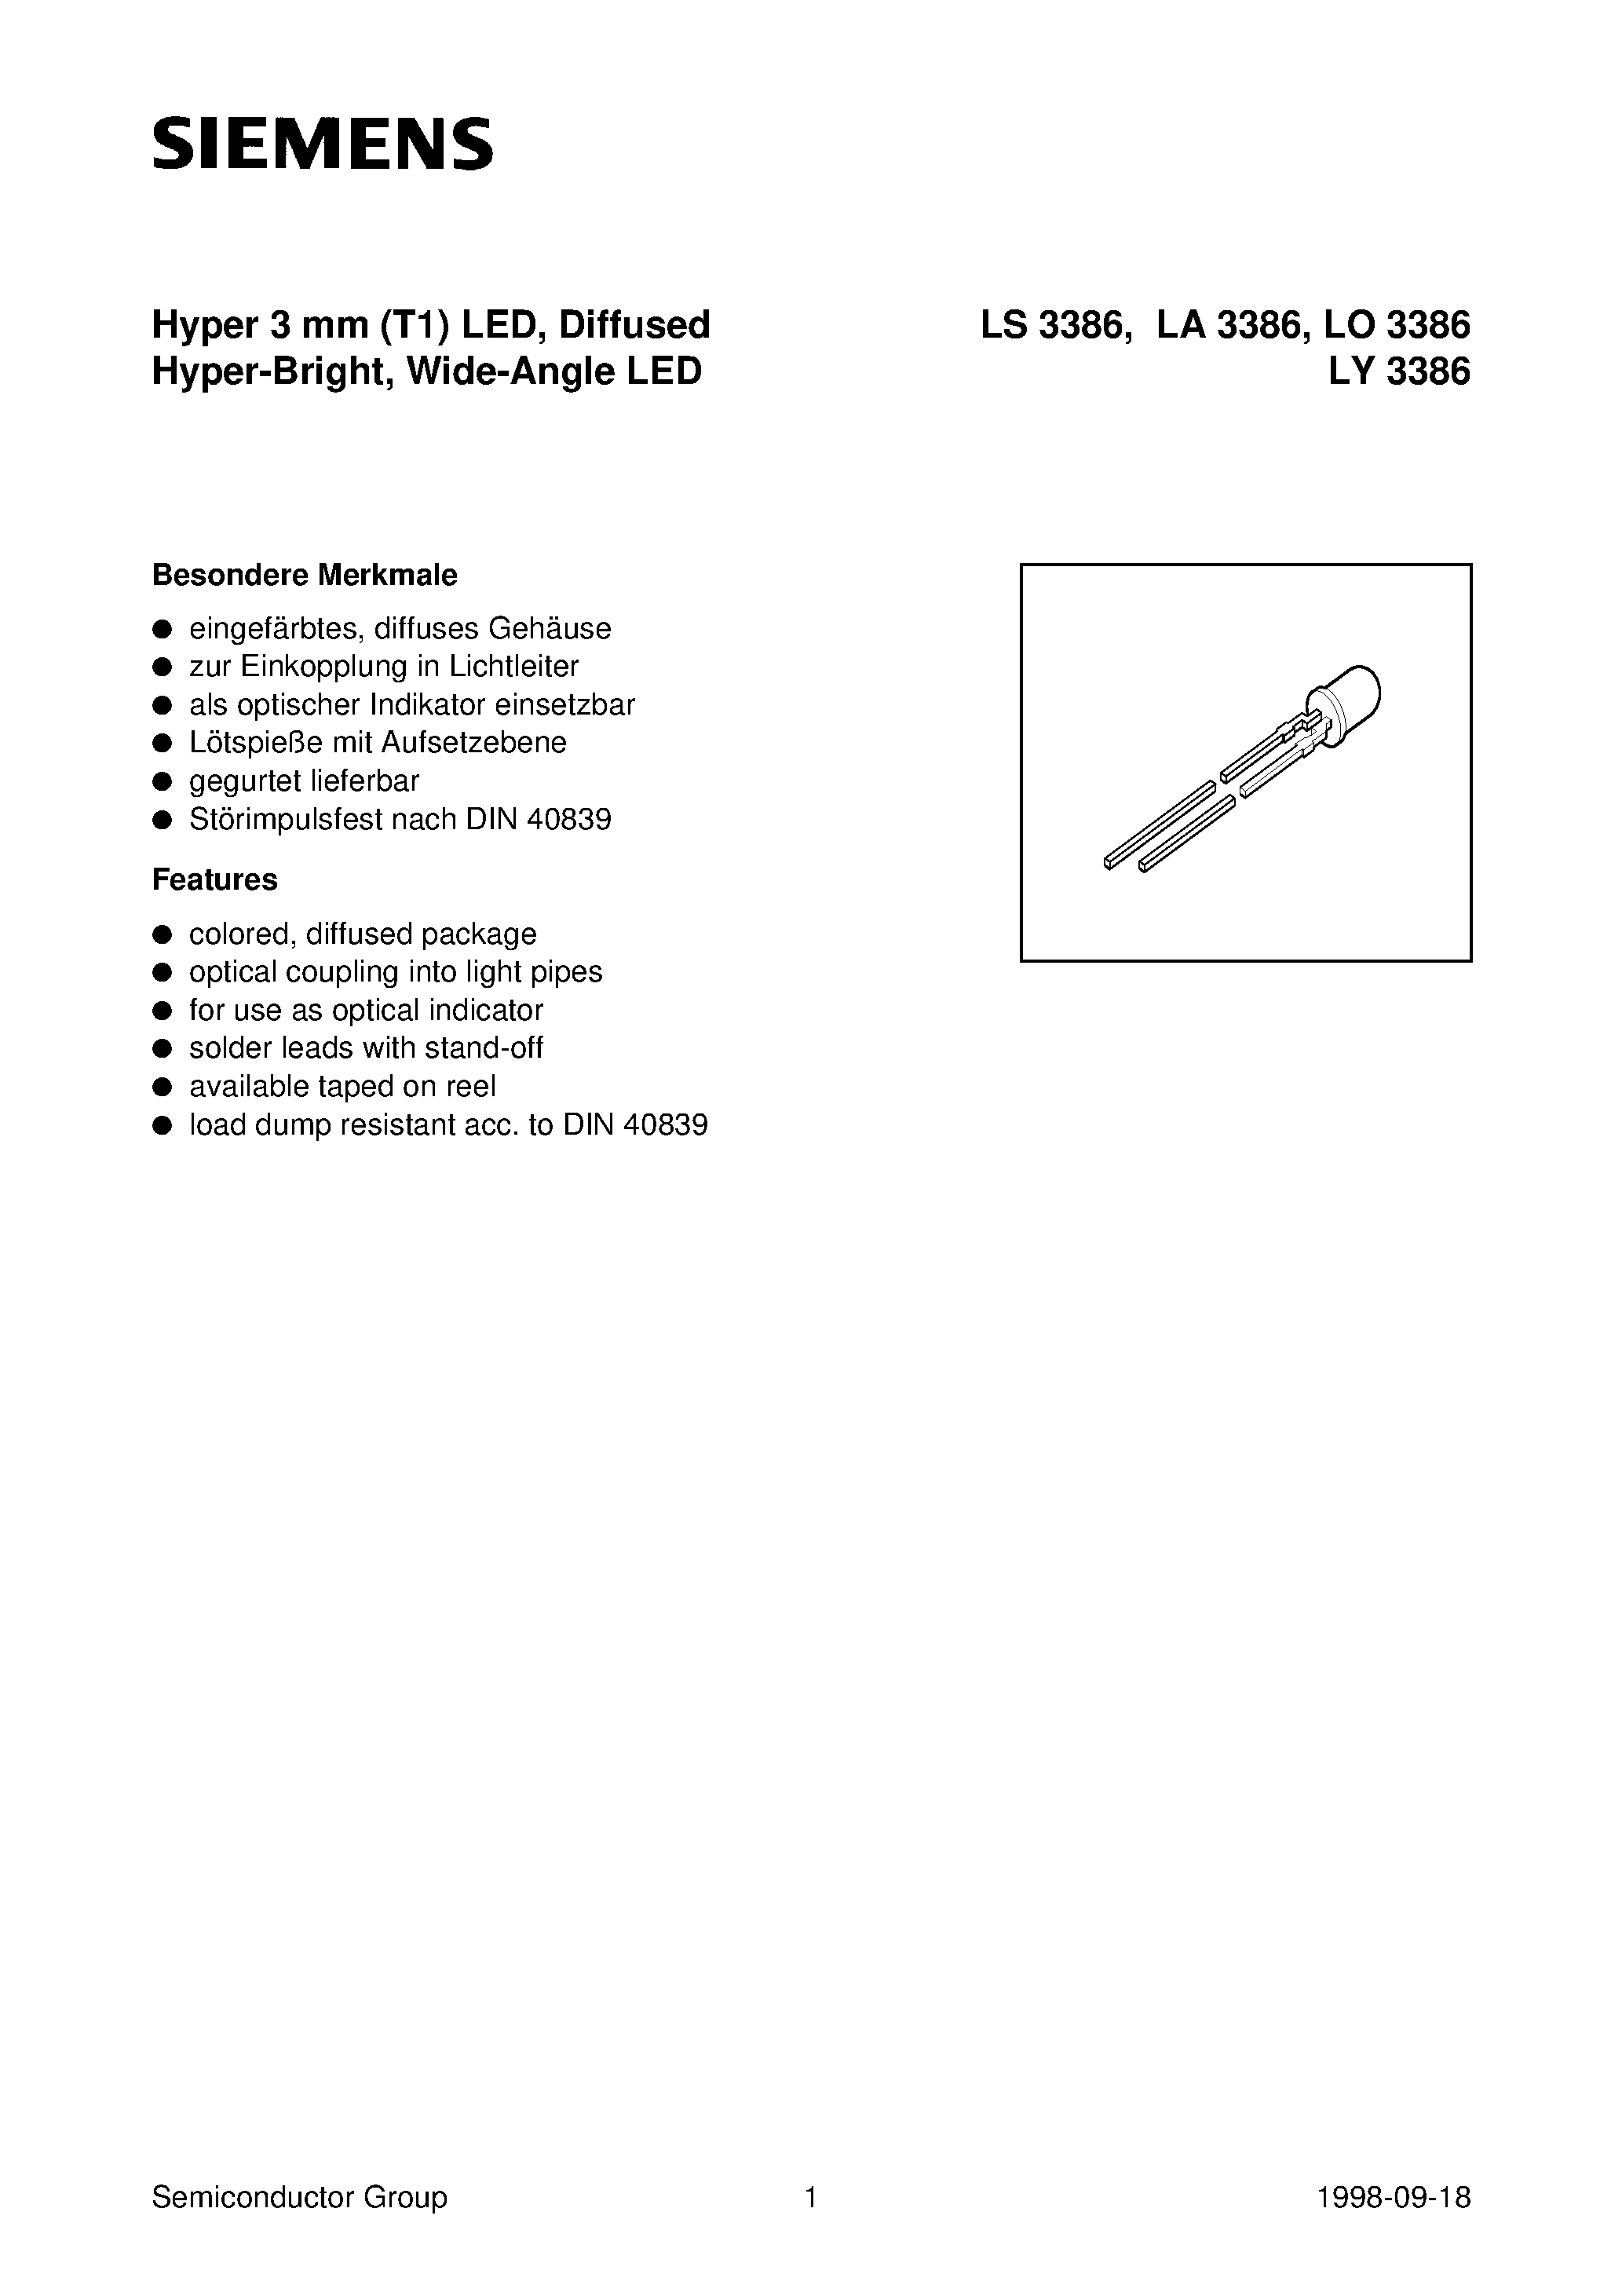 Datasheet LY3386-Q - Hyper 3 mm T1 LED/ Diffused Hyper-Bright/ Wide-Angle LED page 1